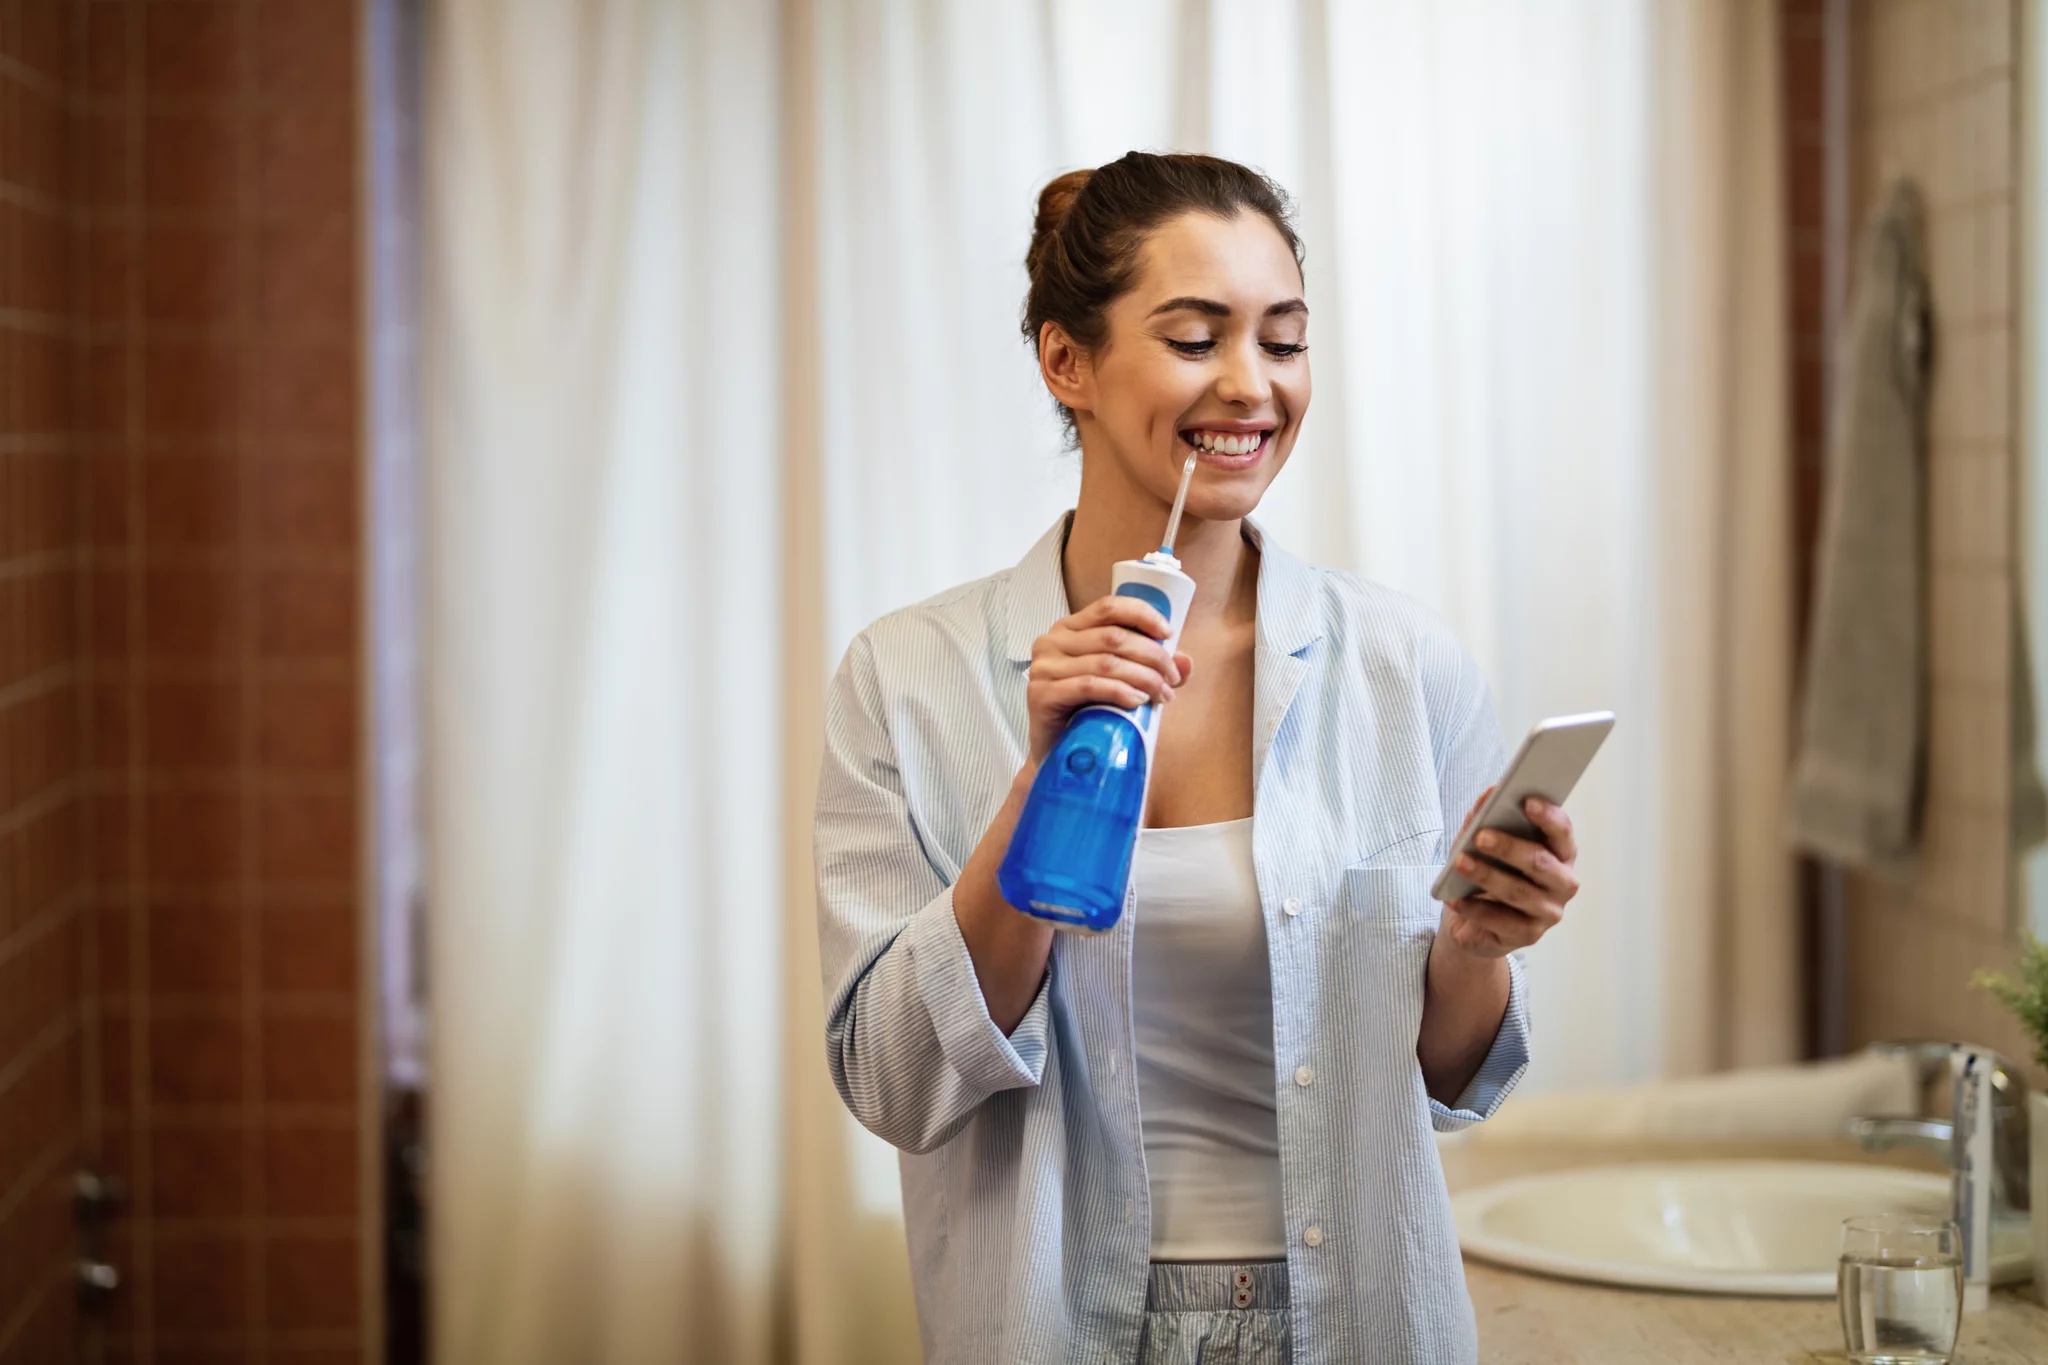 6 Common benefits of flossing teeth Pros & cons of mouthwash